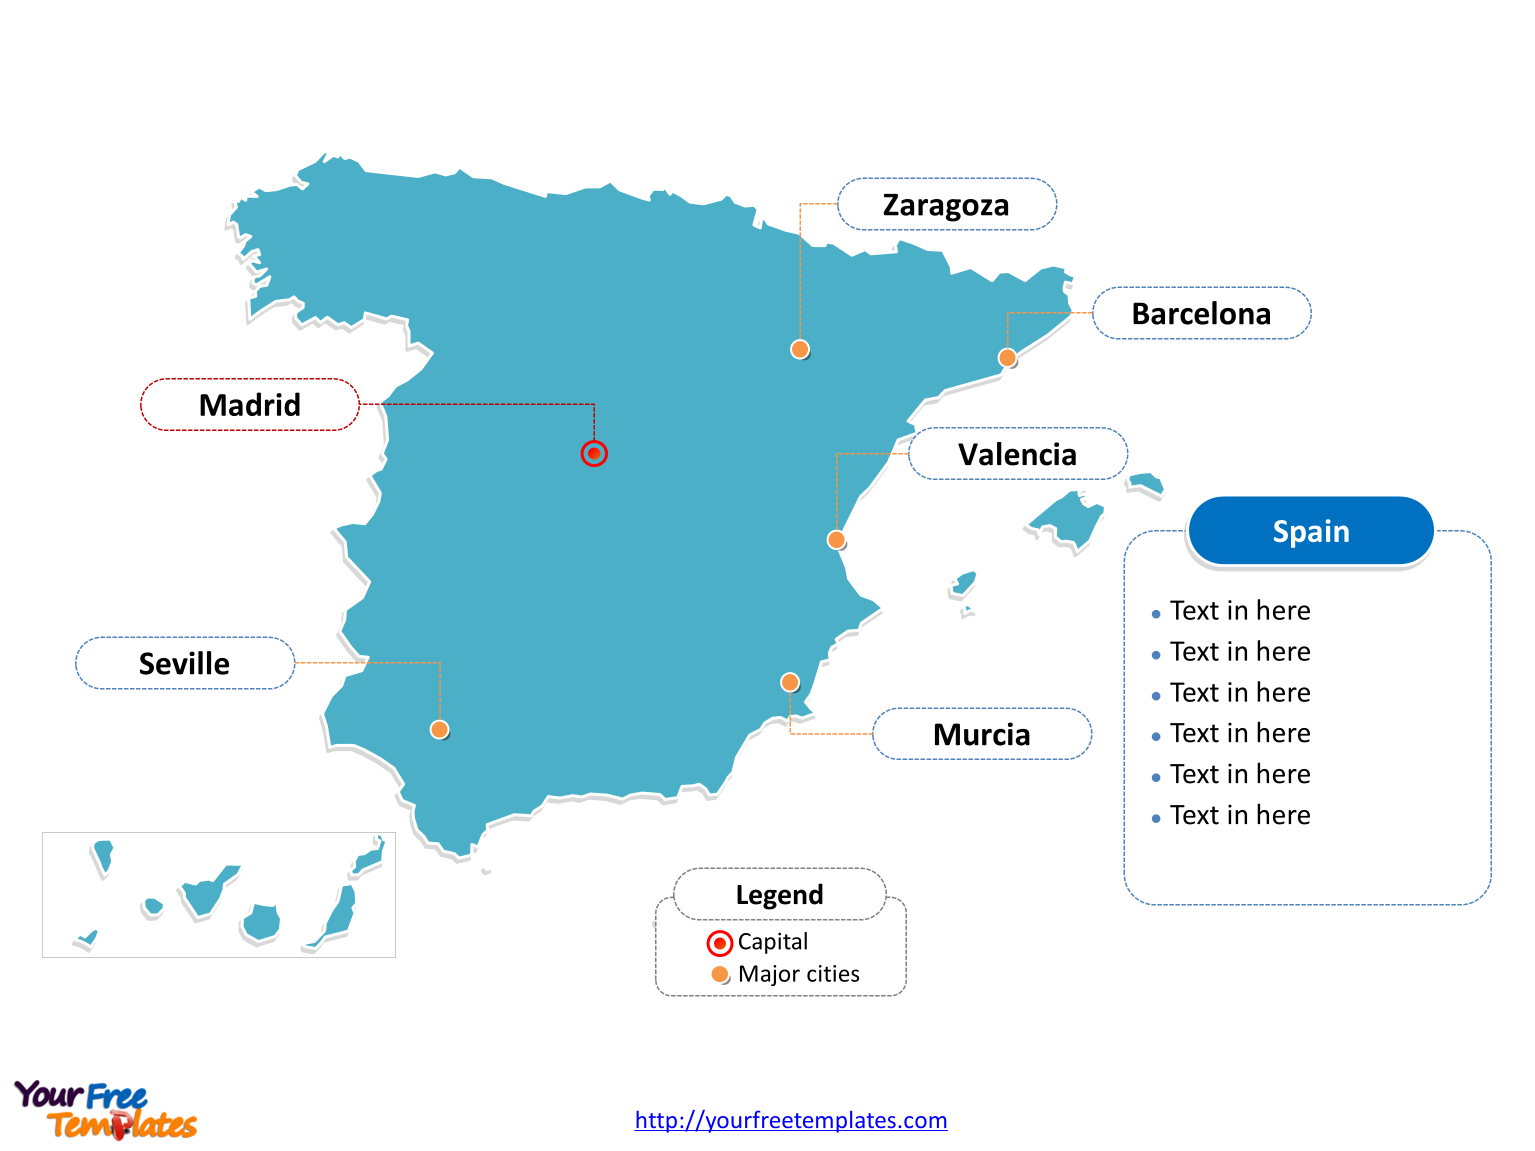 Free Spain Powerpoint Map Free Powerpoint Templates